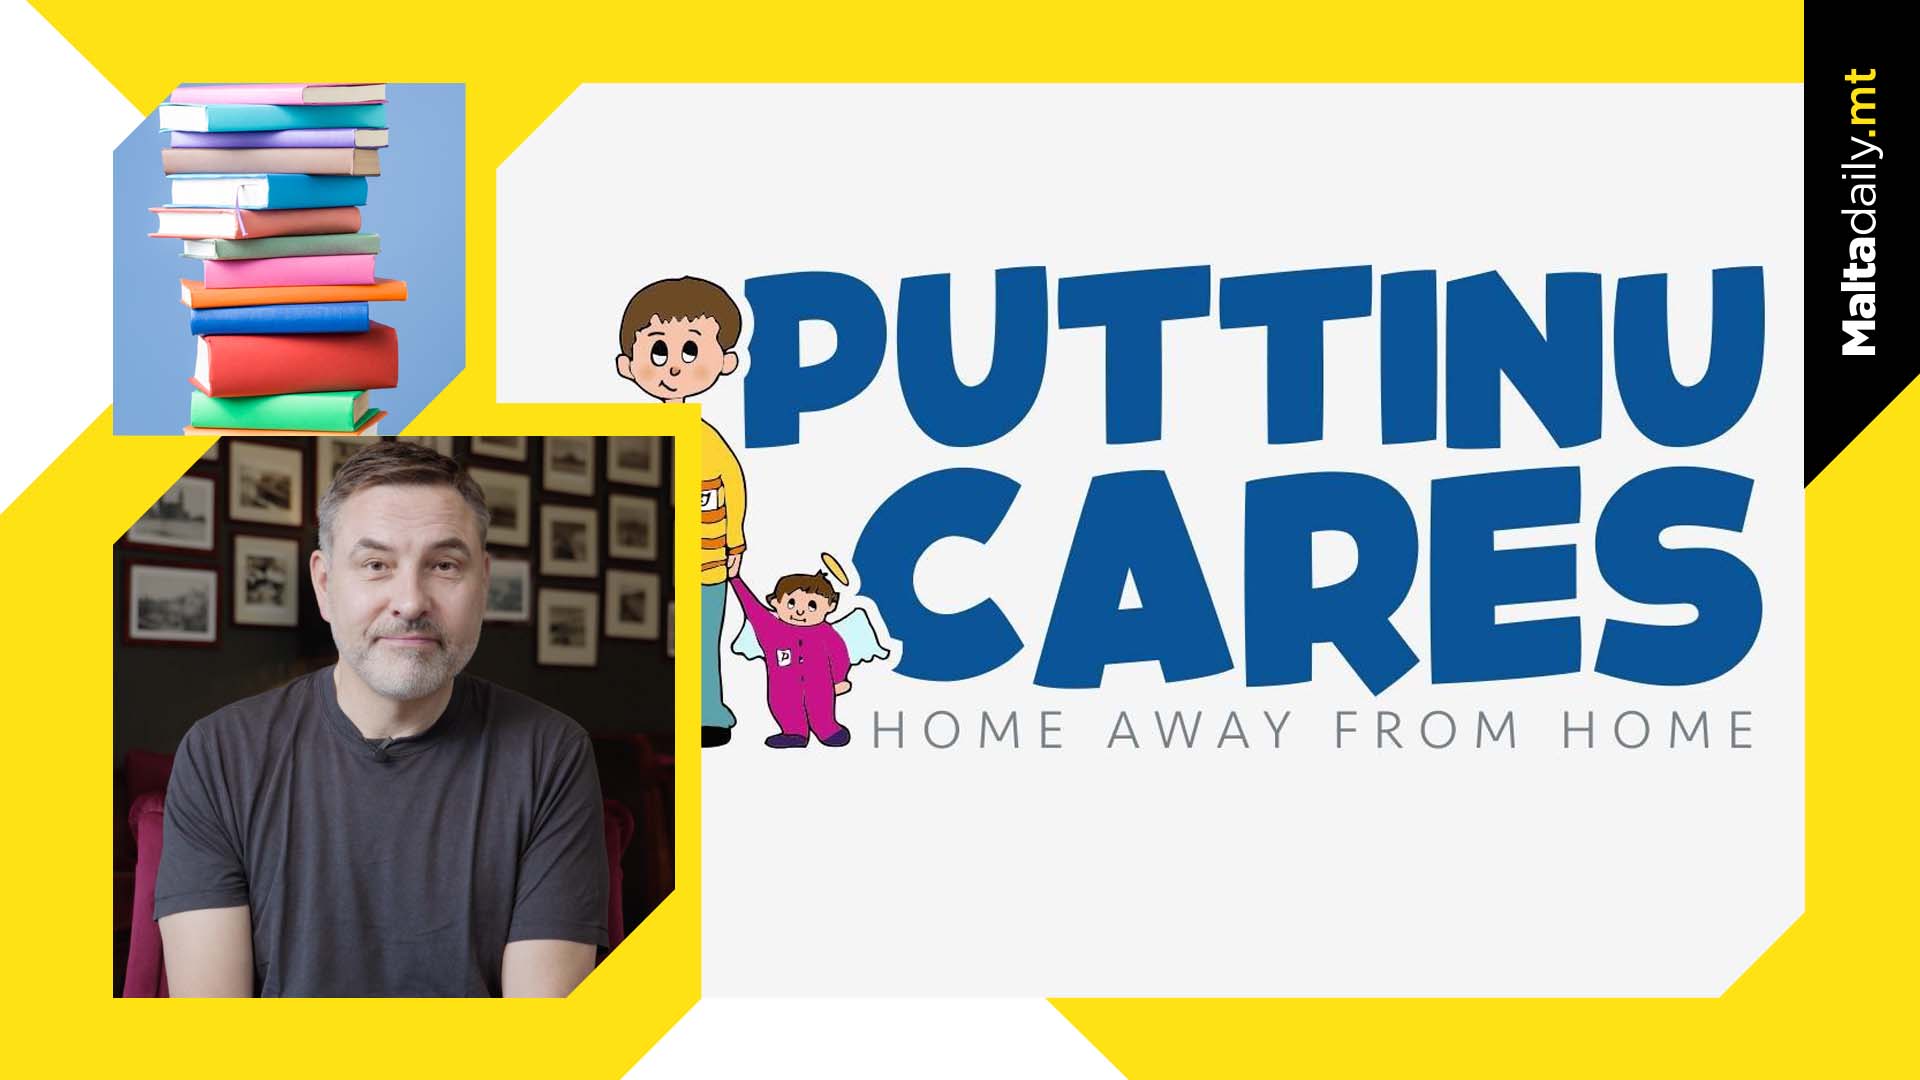 David Walliams To Host Live Book Show In Aid of Puttinu Cares